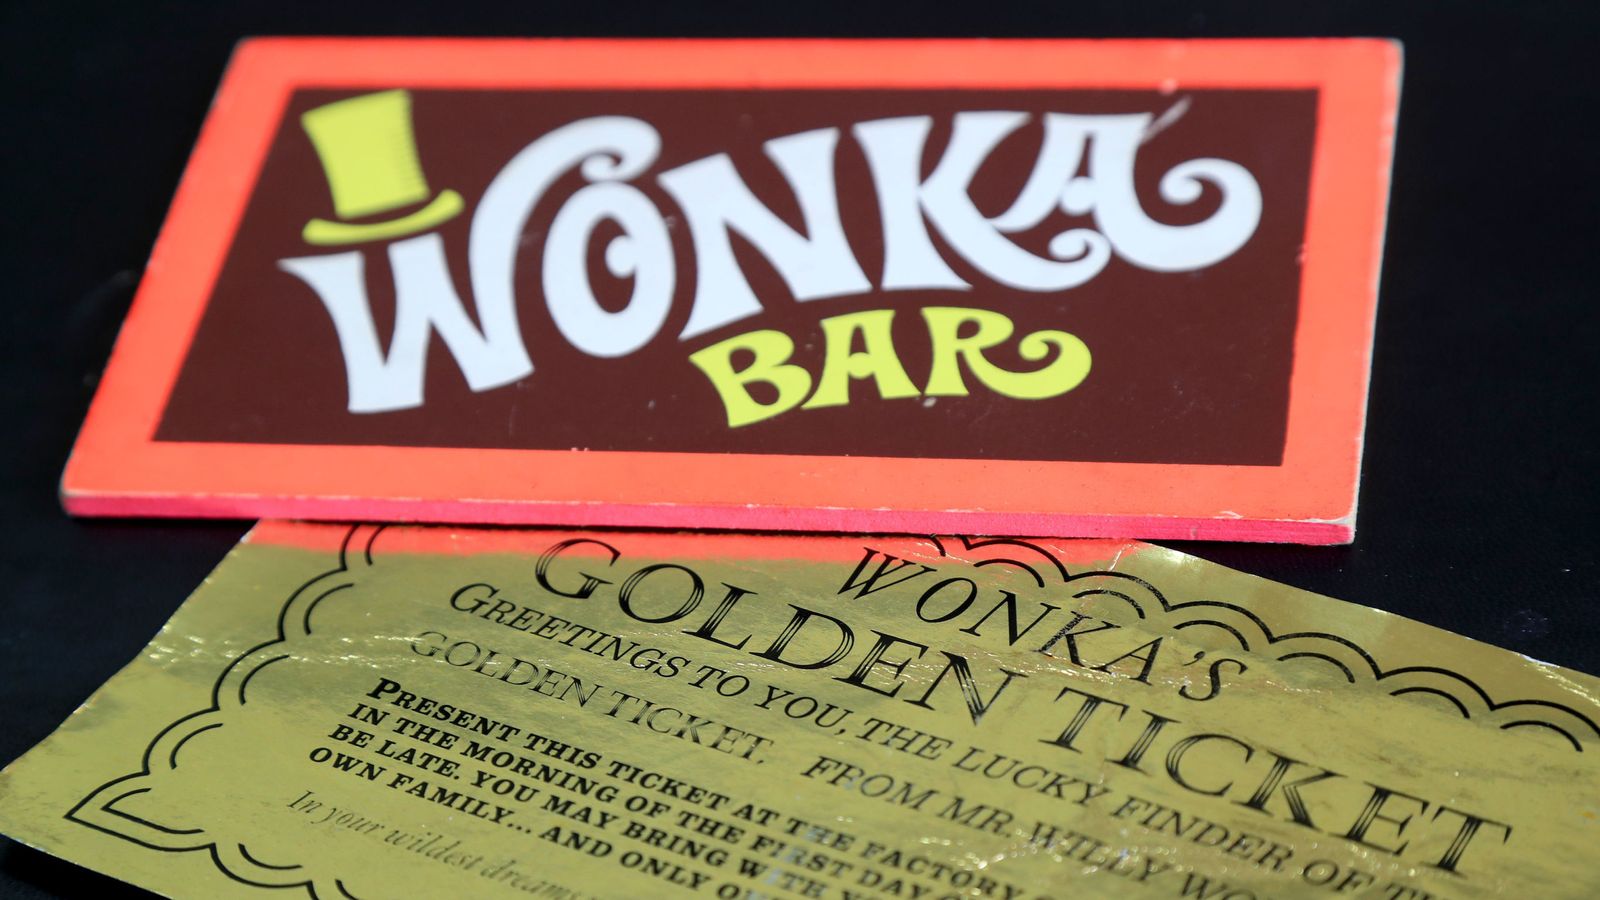 It's a golden ticket! Classic Wonka prop up for auction | UK News | Sky ...